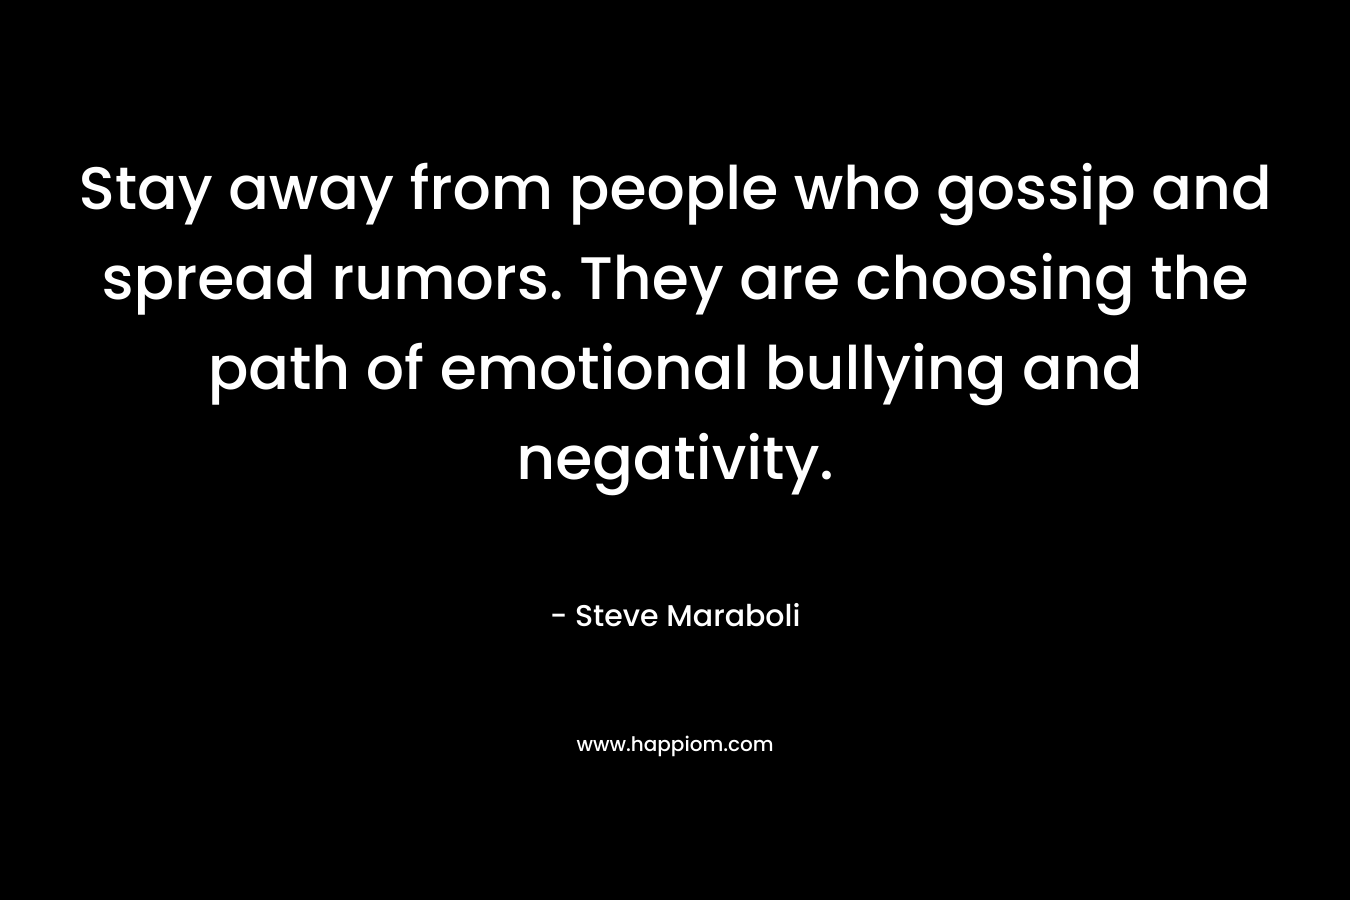 Stay away from people who gossip and spread rumors. They are choosing the path of emotional bullying and negativity. – Steve Maraboli